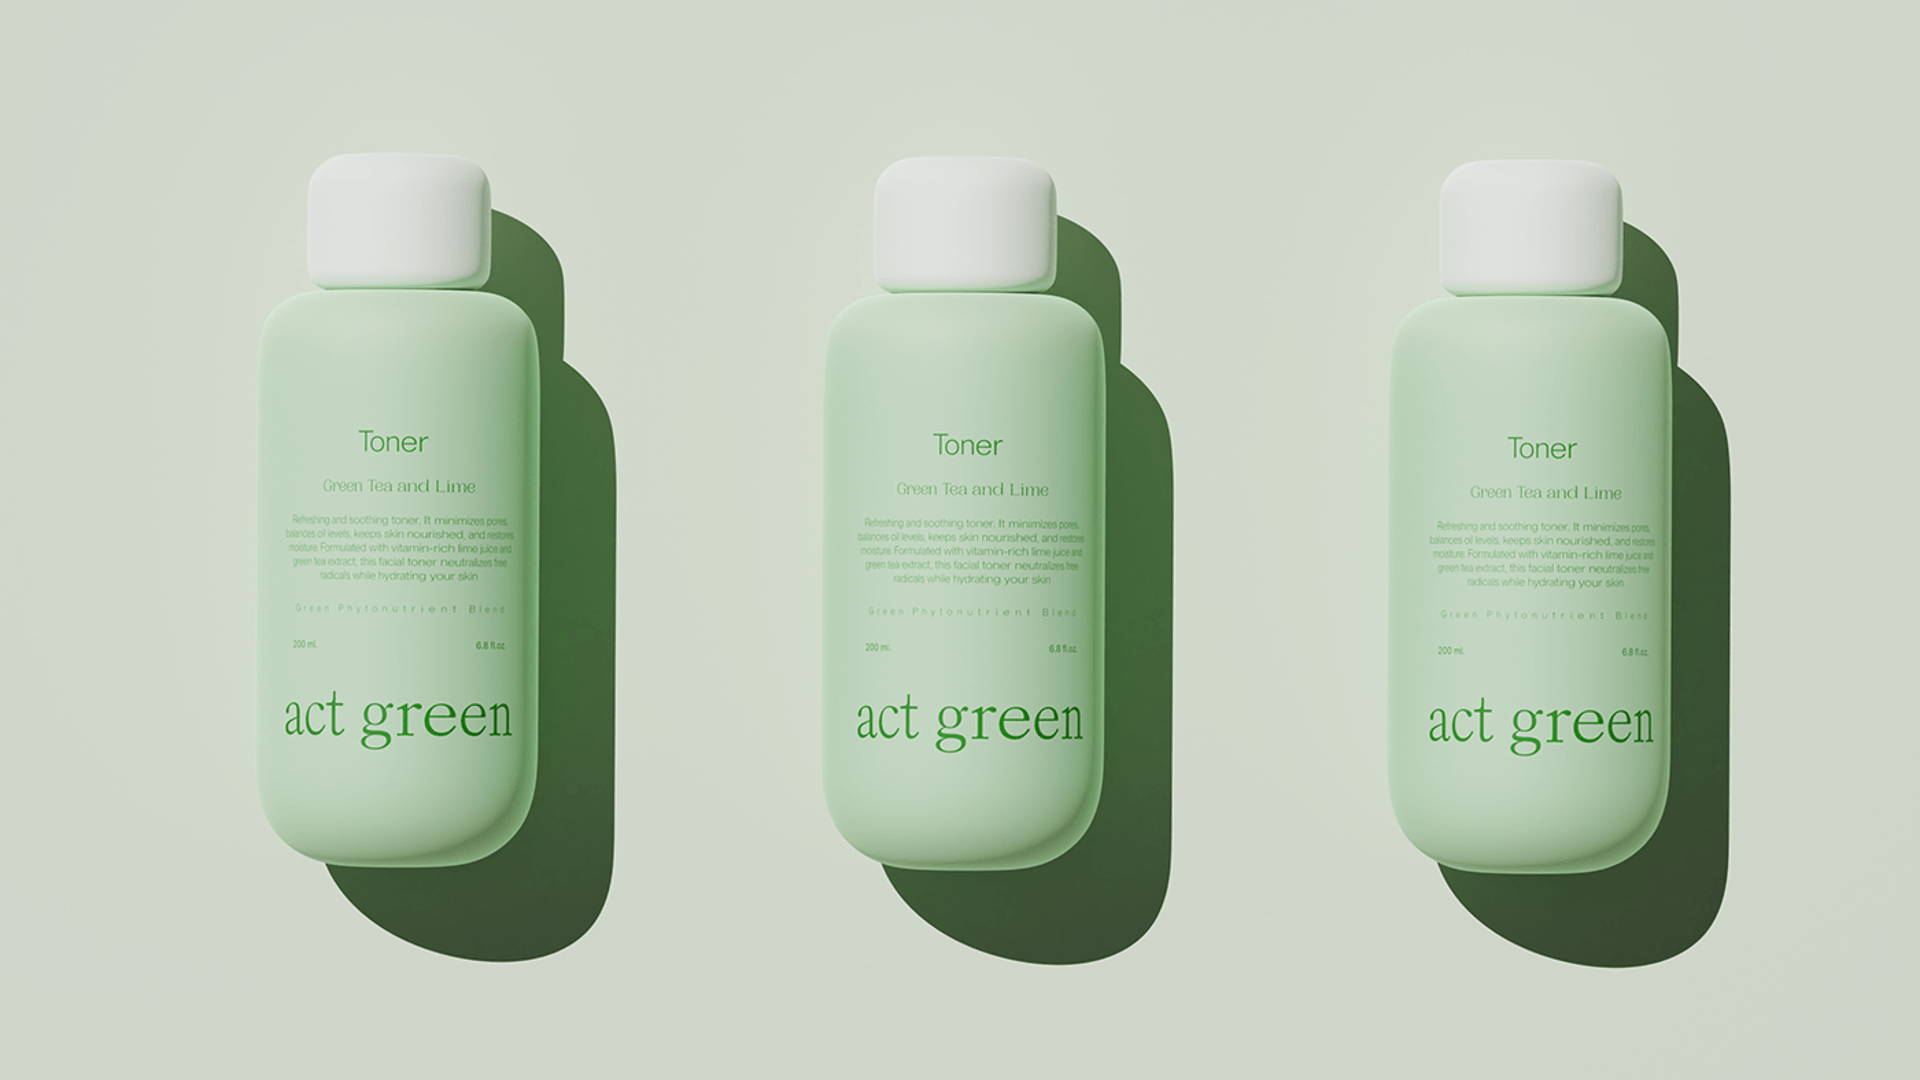 Featured image for act green's Restoratively Soothing Packaging Design